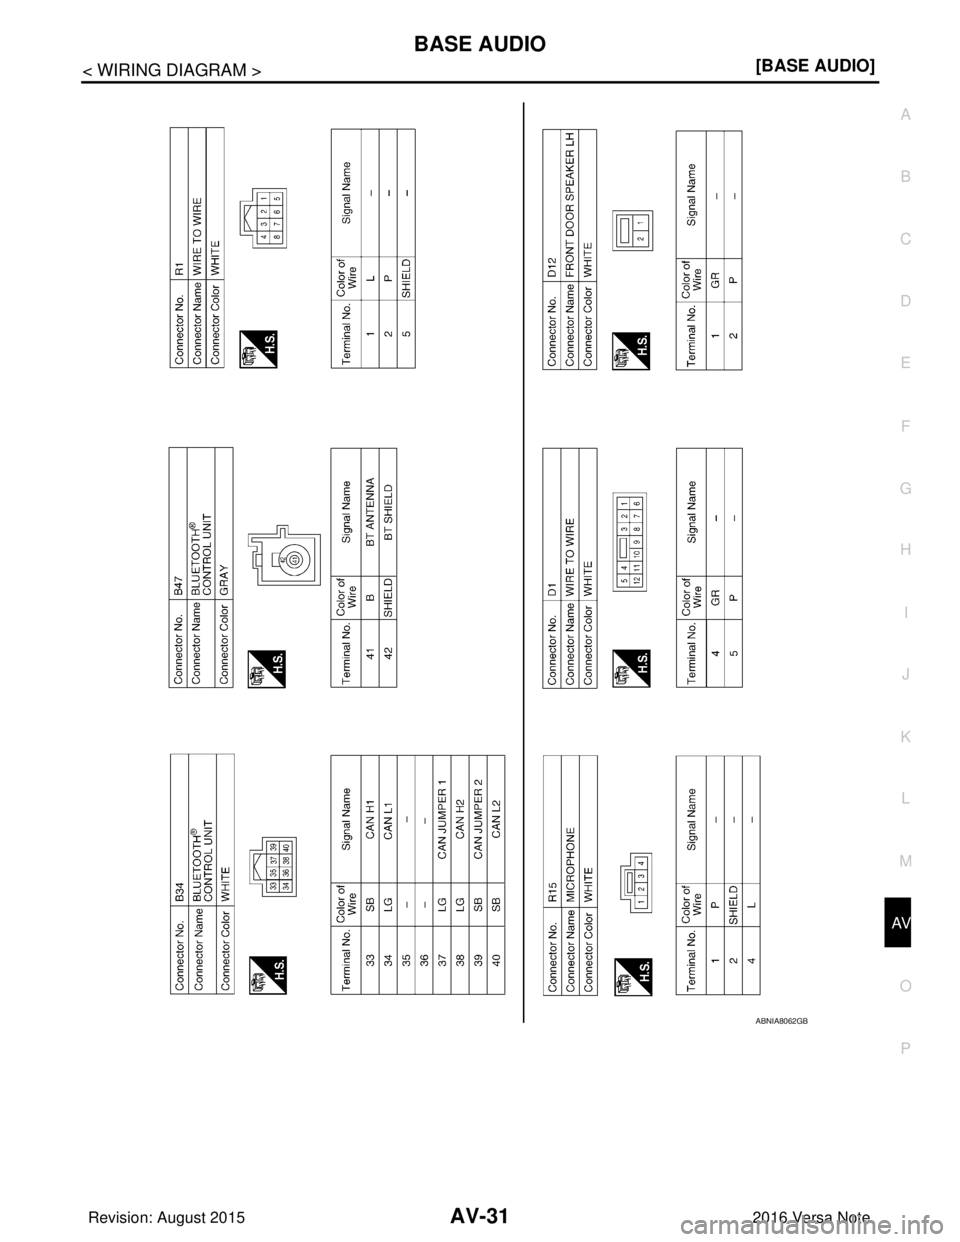 NISSAN NOTE 2016  Service Owners Guide AV
BASE AUDIOAV-31
< WIRING DIAGRAM > [BASE AUDIO]
C
D
E
F
G H
I
J
K L
M B A
O P
ABNIA8062GB
Revision: August 2015 2016 Versa Note

cardiagn.com  